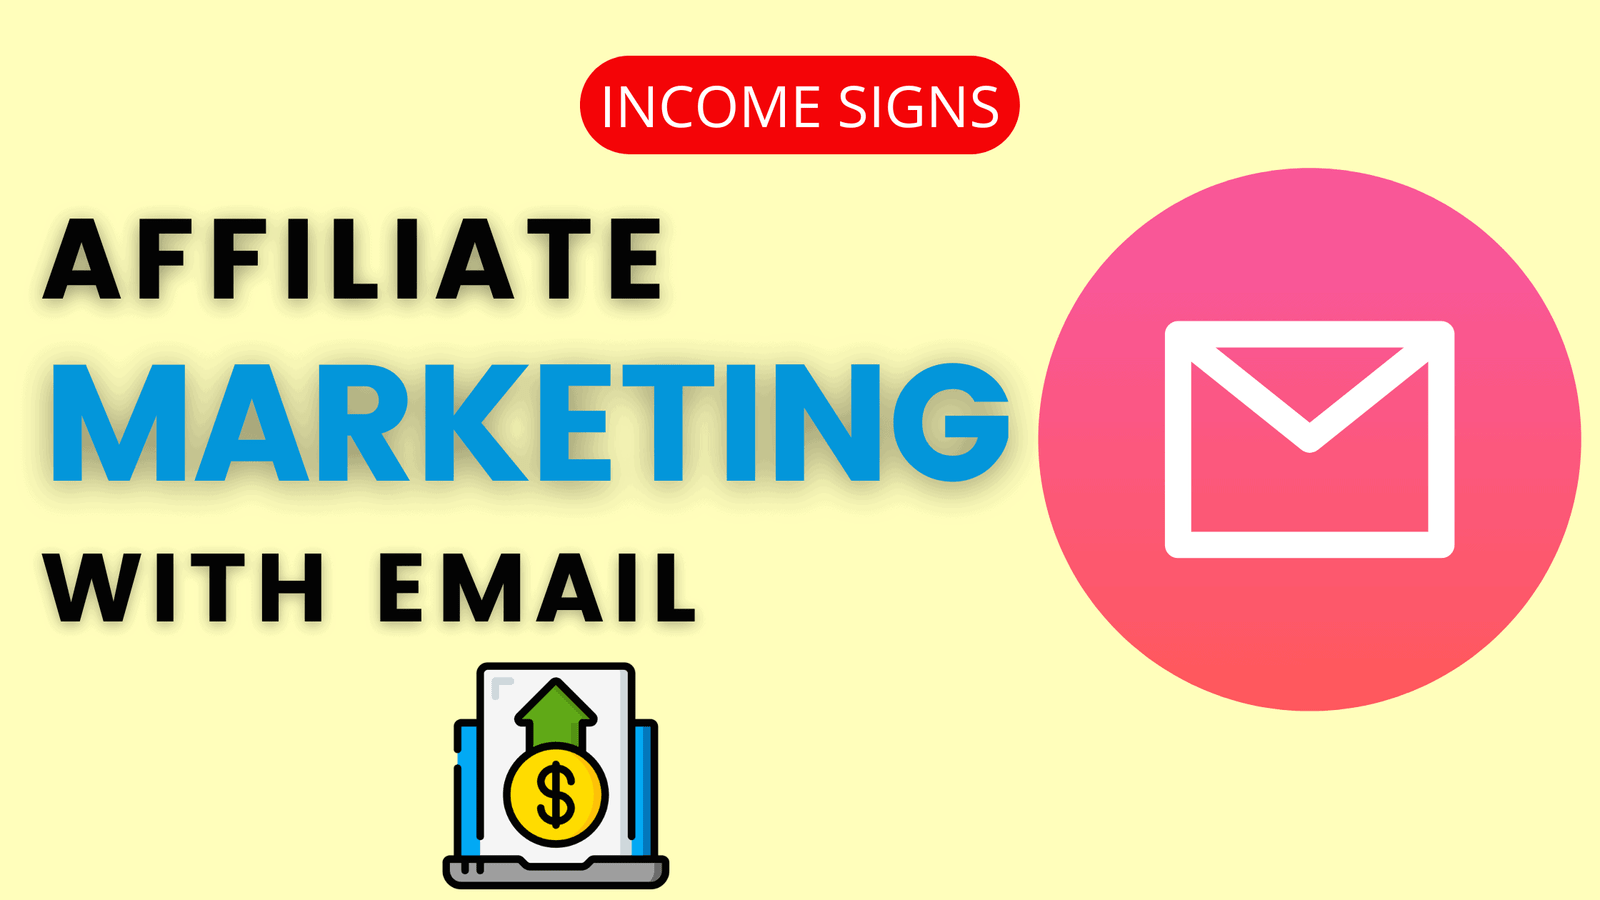 How to Build Email List and Promote Affiliate Offers?